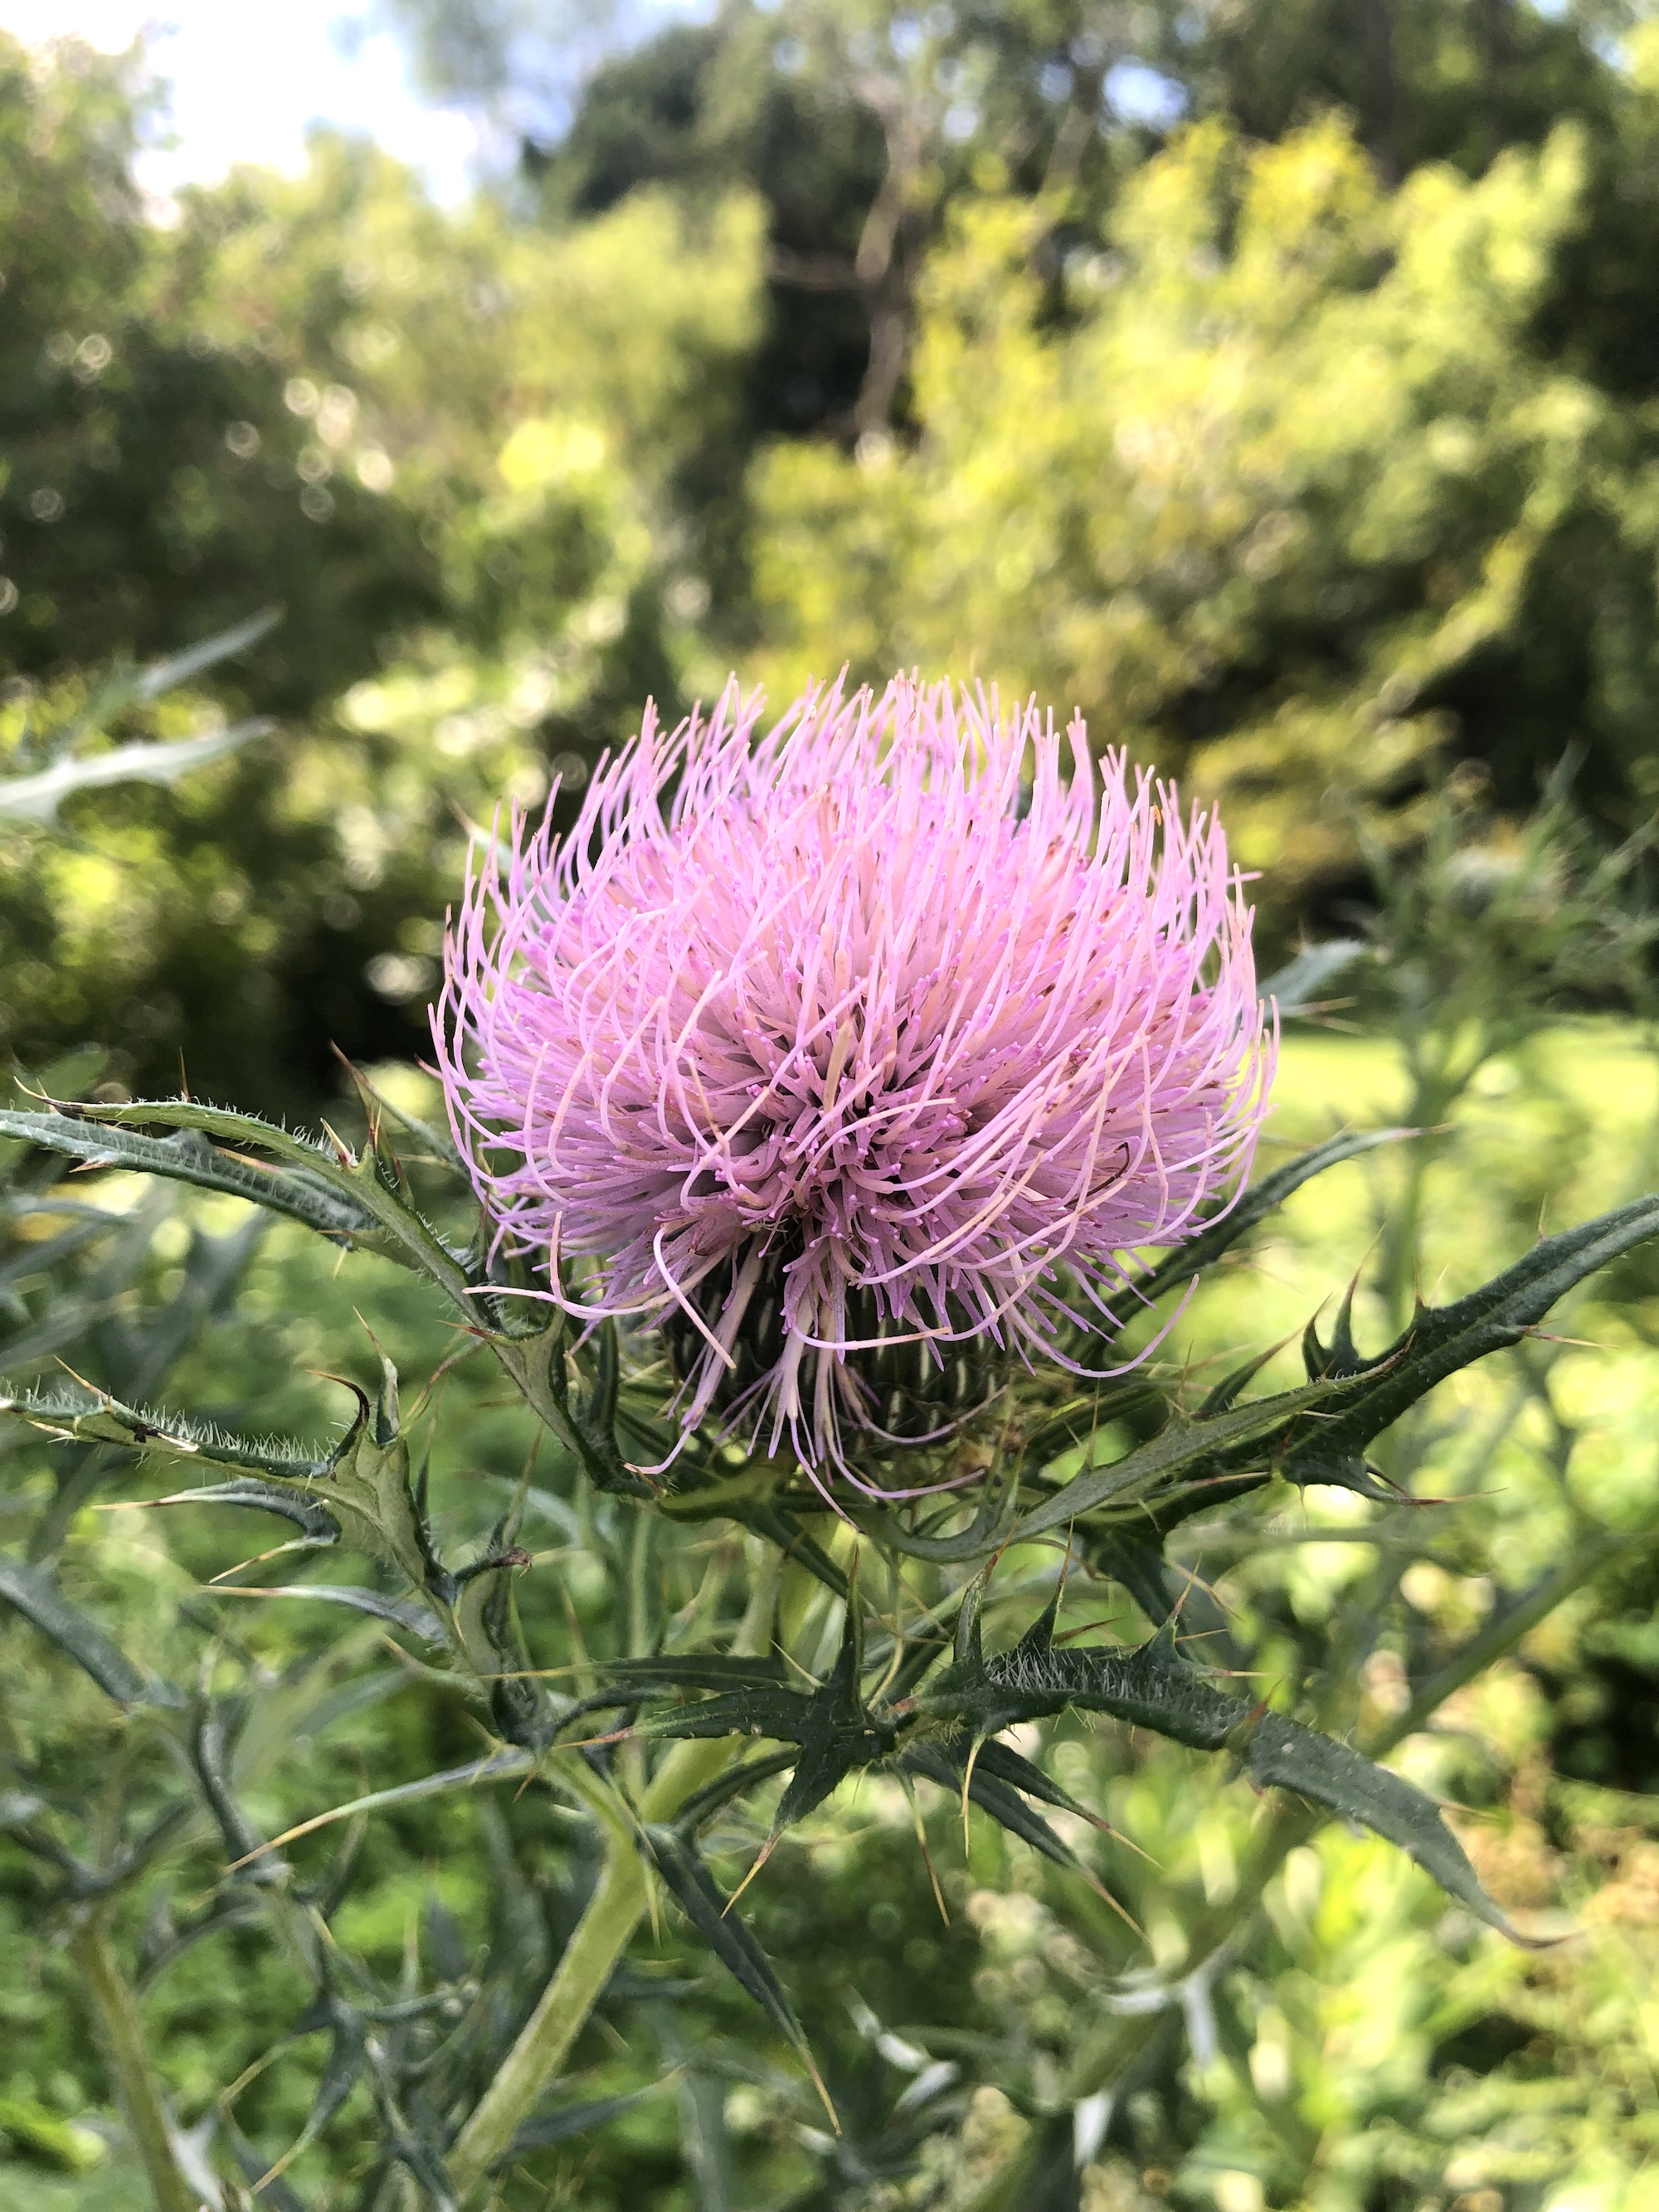 Field Thistle near the UW Arboretum Seminiole Highway entrance in Madison, Wisconsin on August 15, 2022.